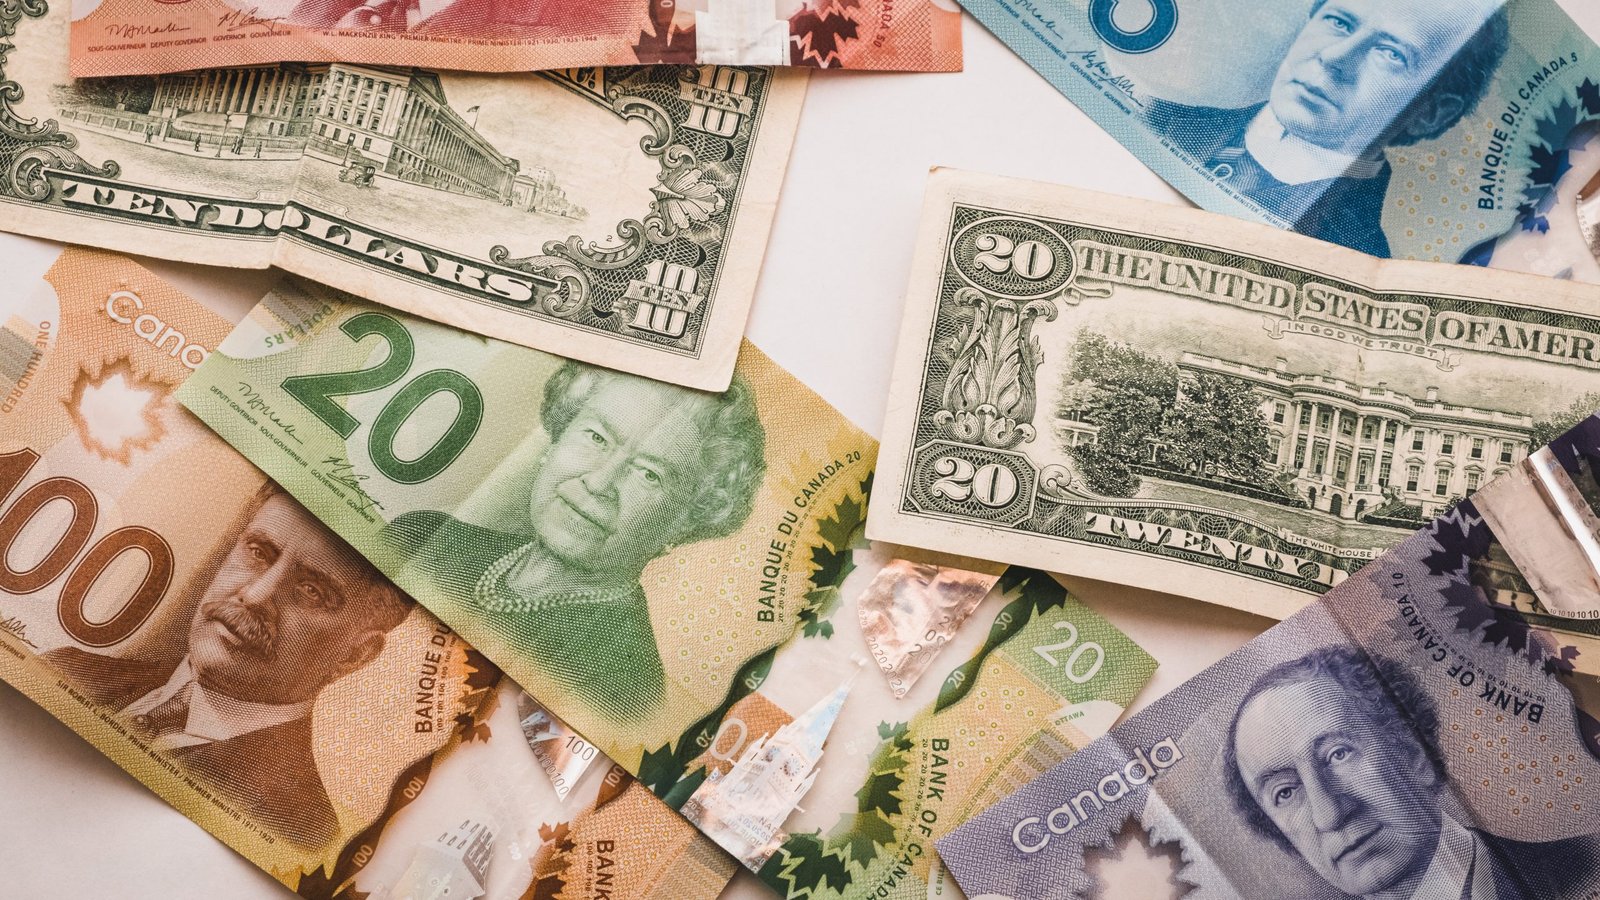 Various Currency #usd #cad #$100 #$50 #$20